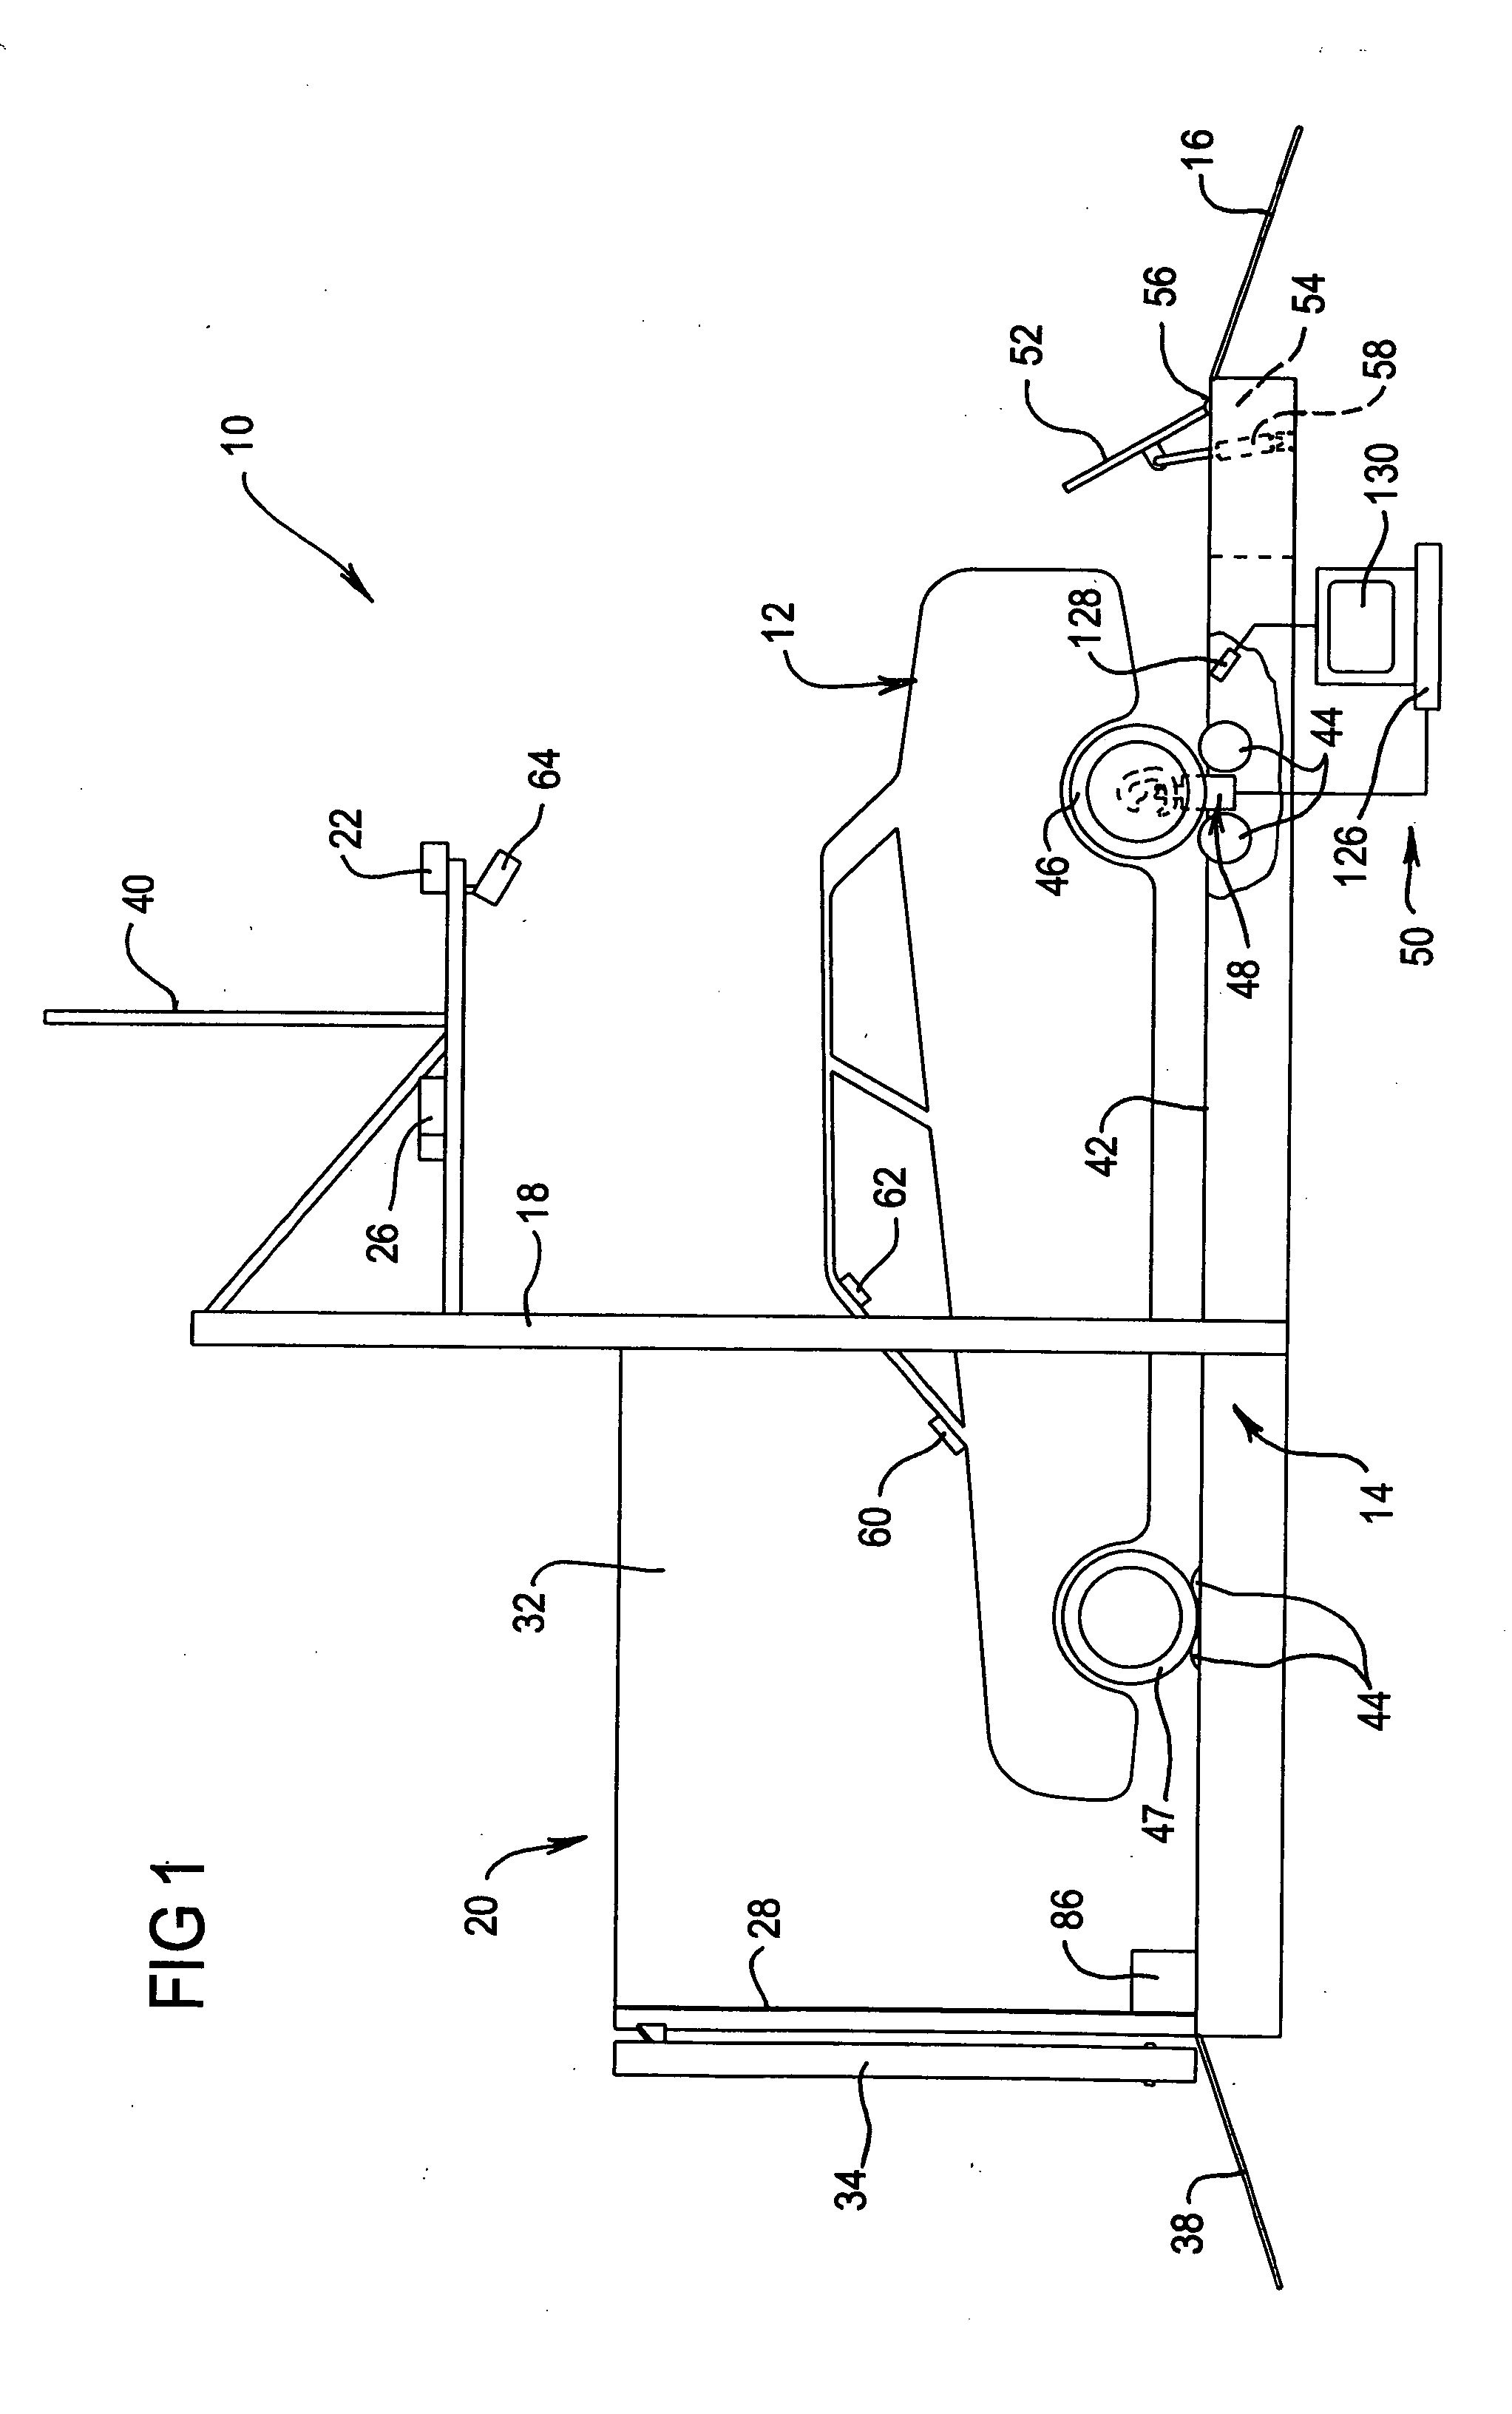 Apparatus for simulated driving of a motor vehicle